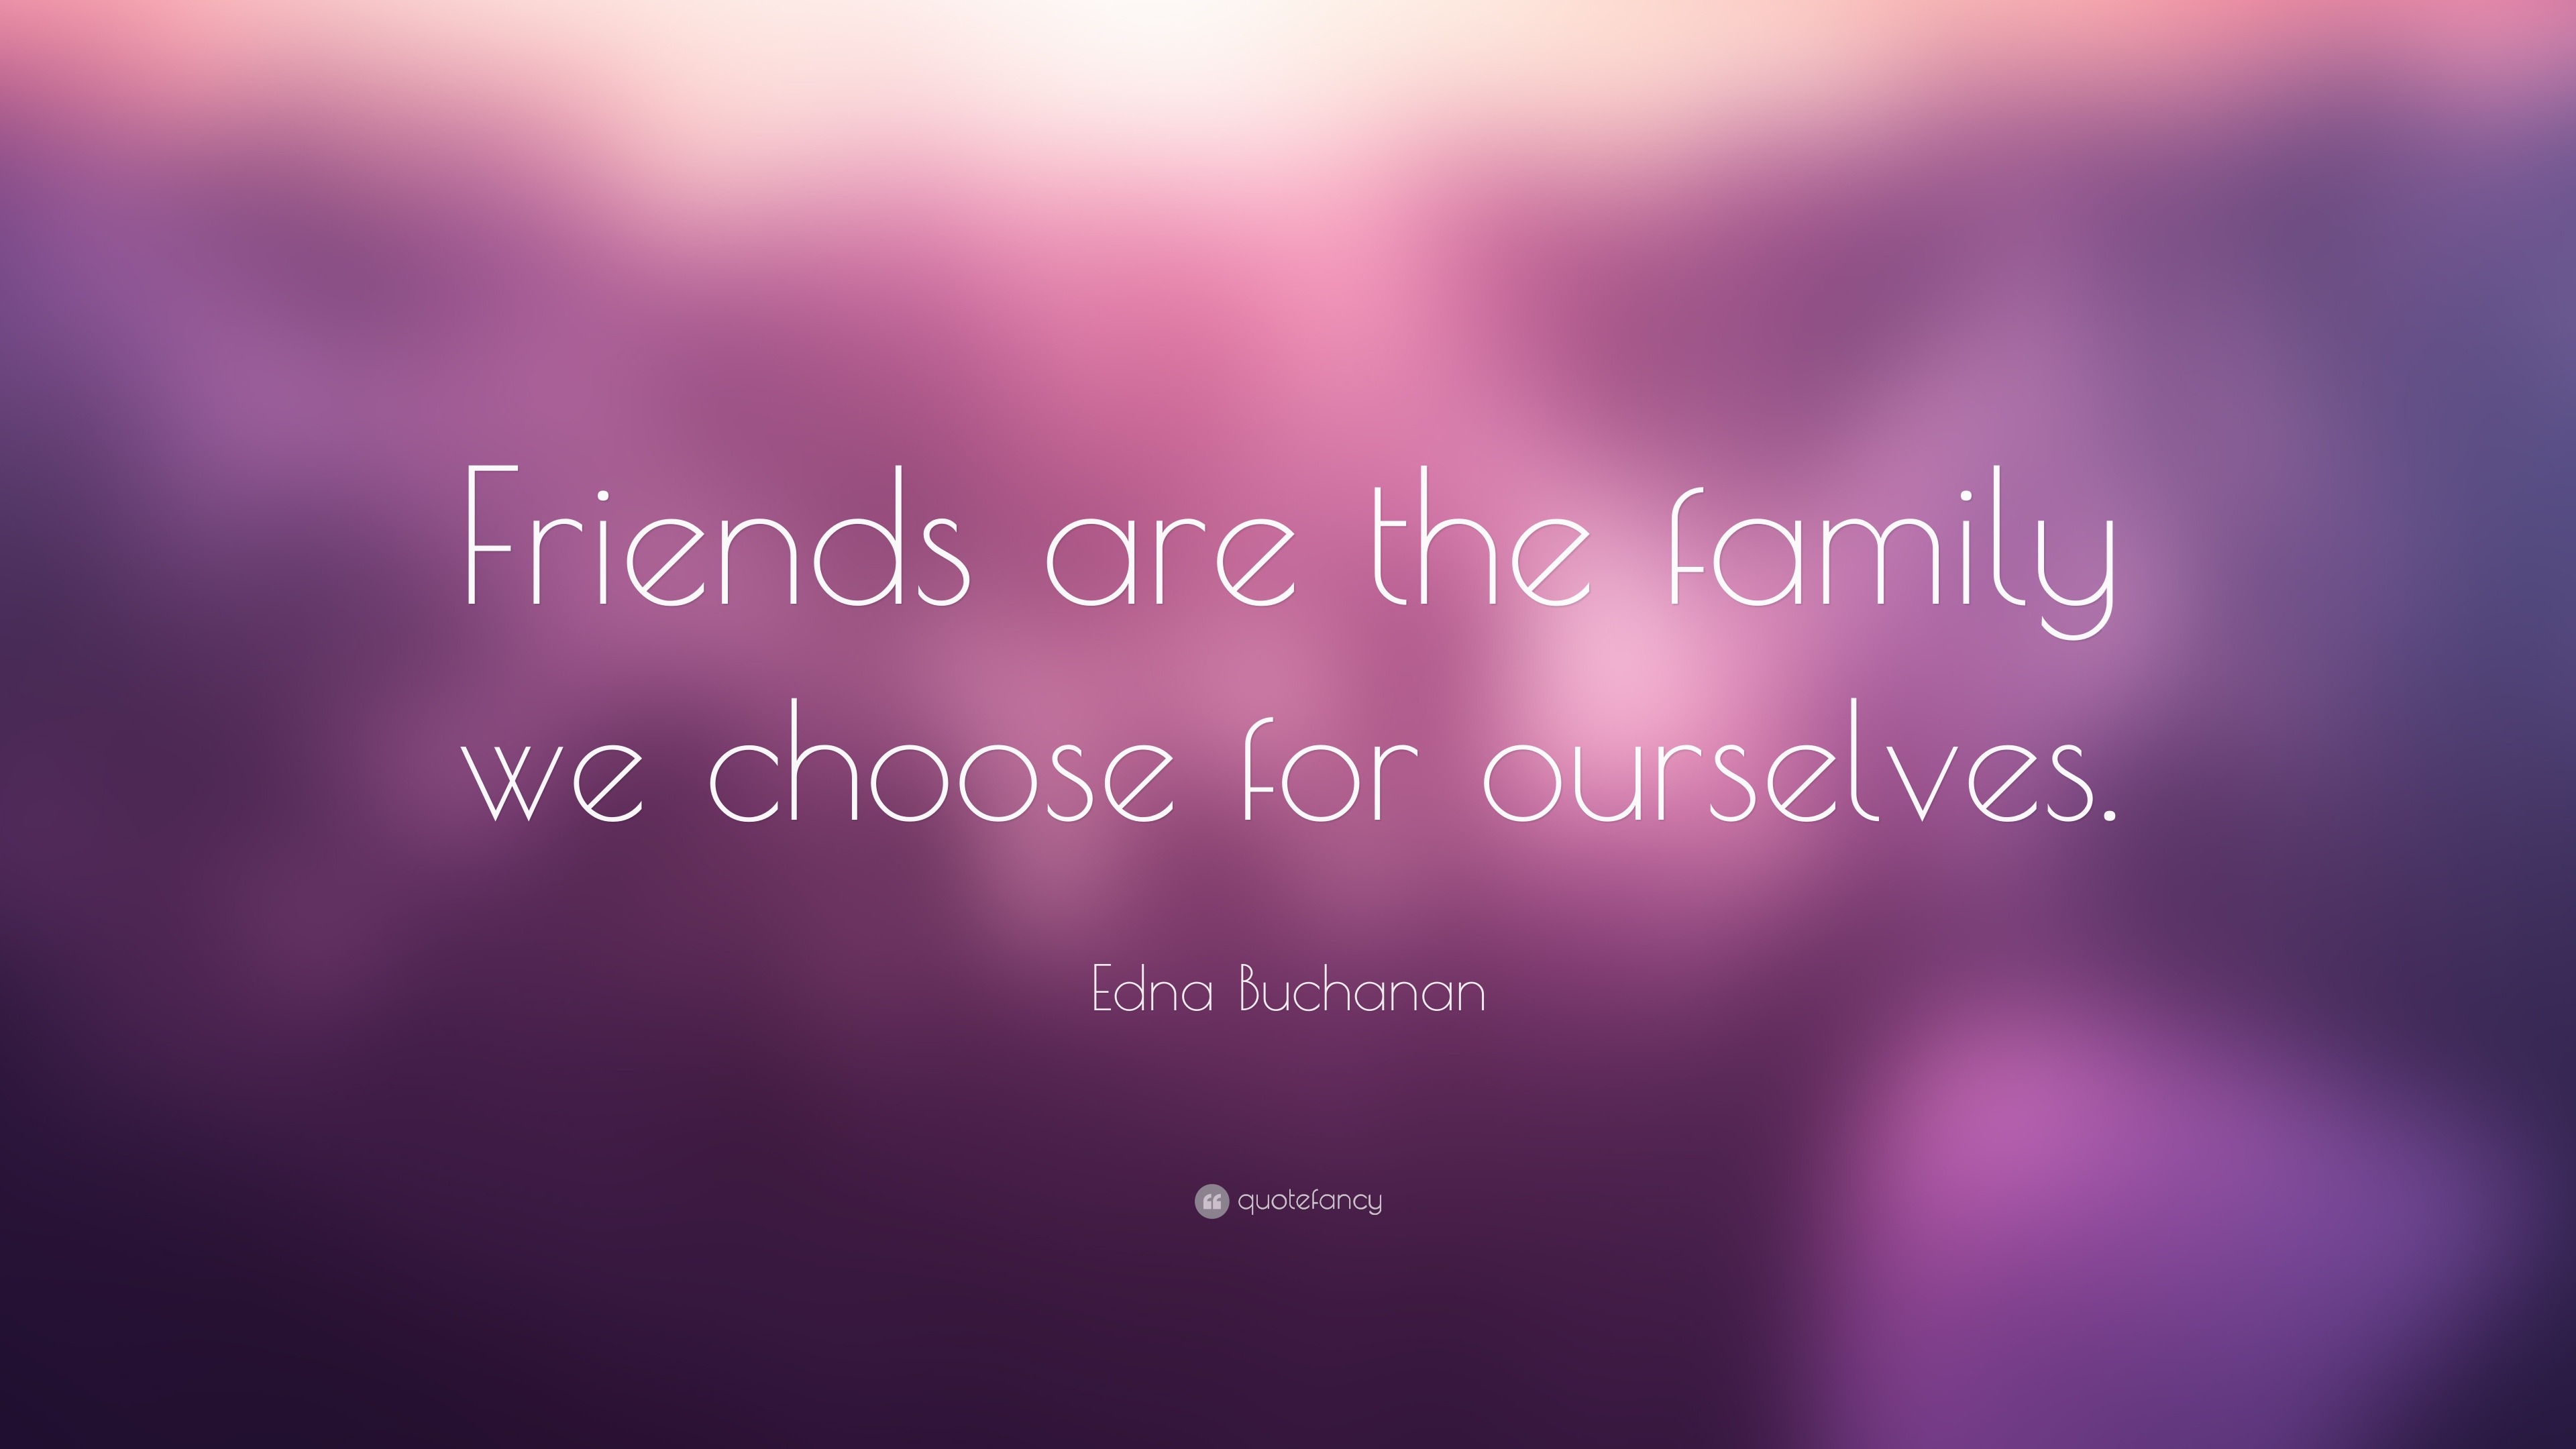 Edna Buchanan Quote “Friends are the family we choose for ourselves.”